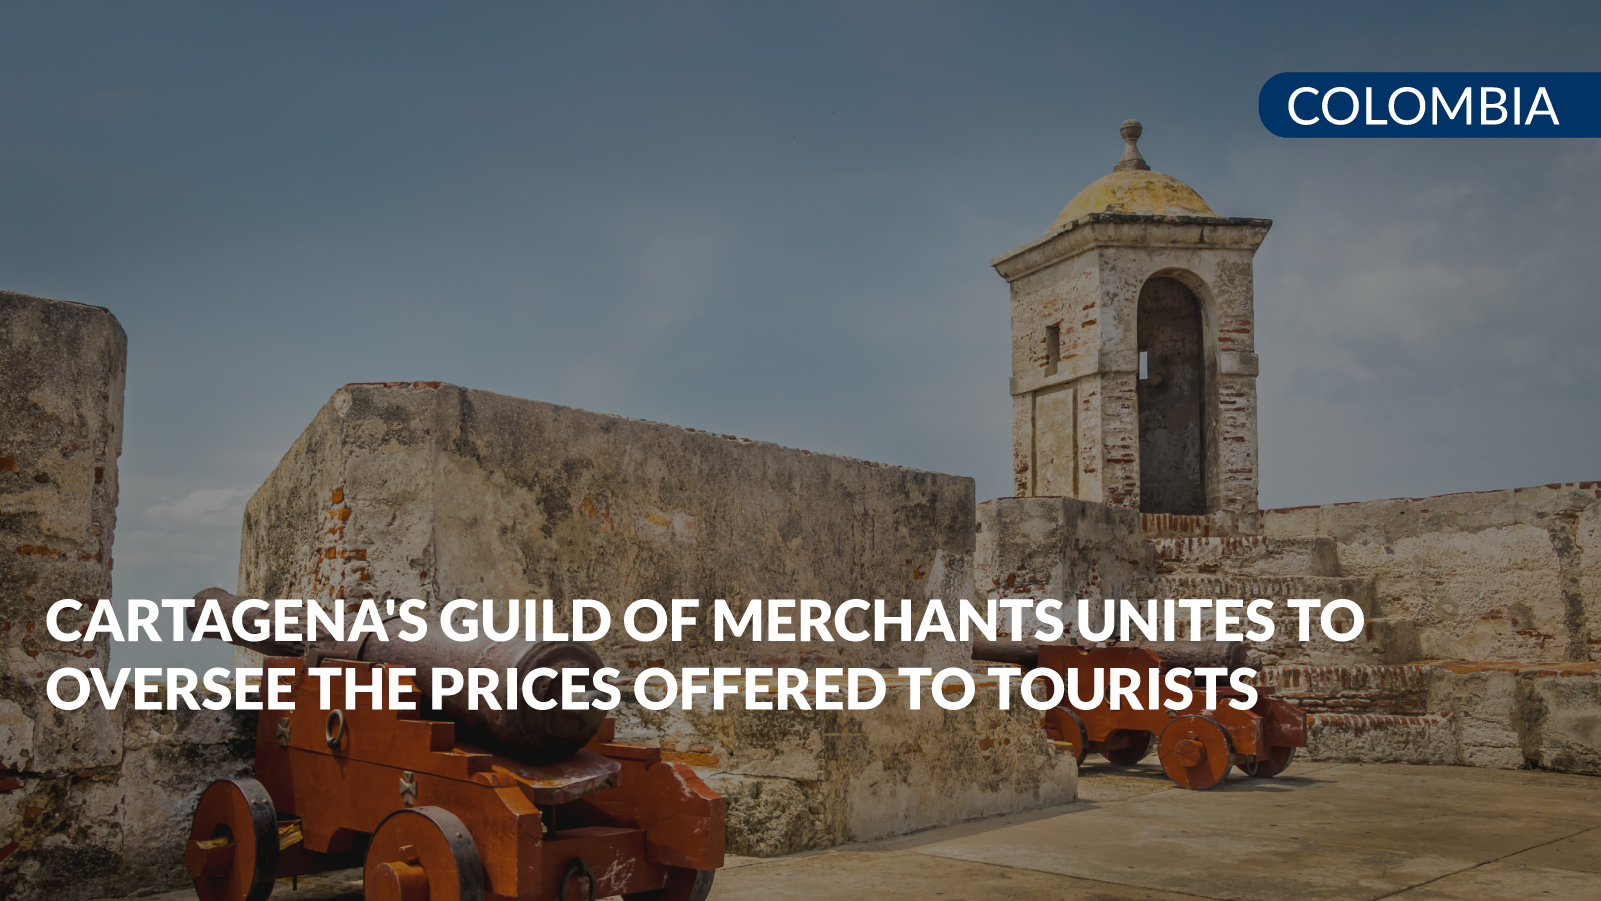 prices offered to tourists